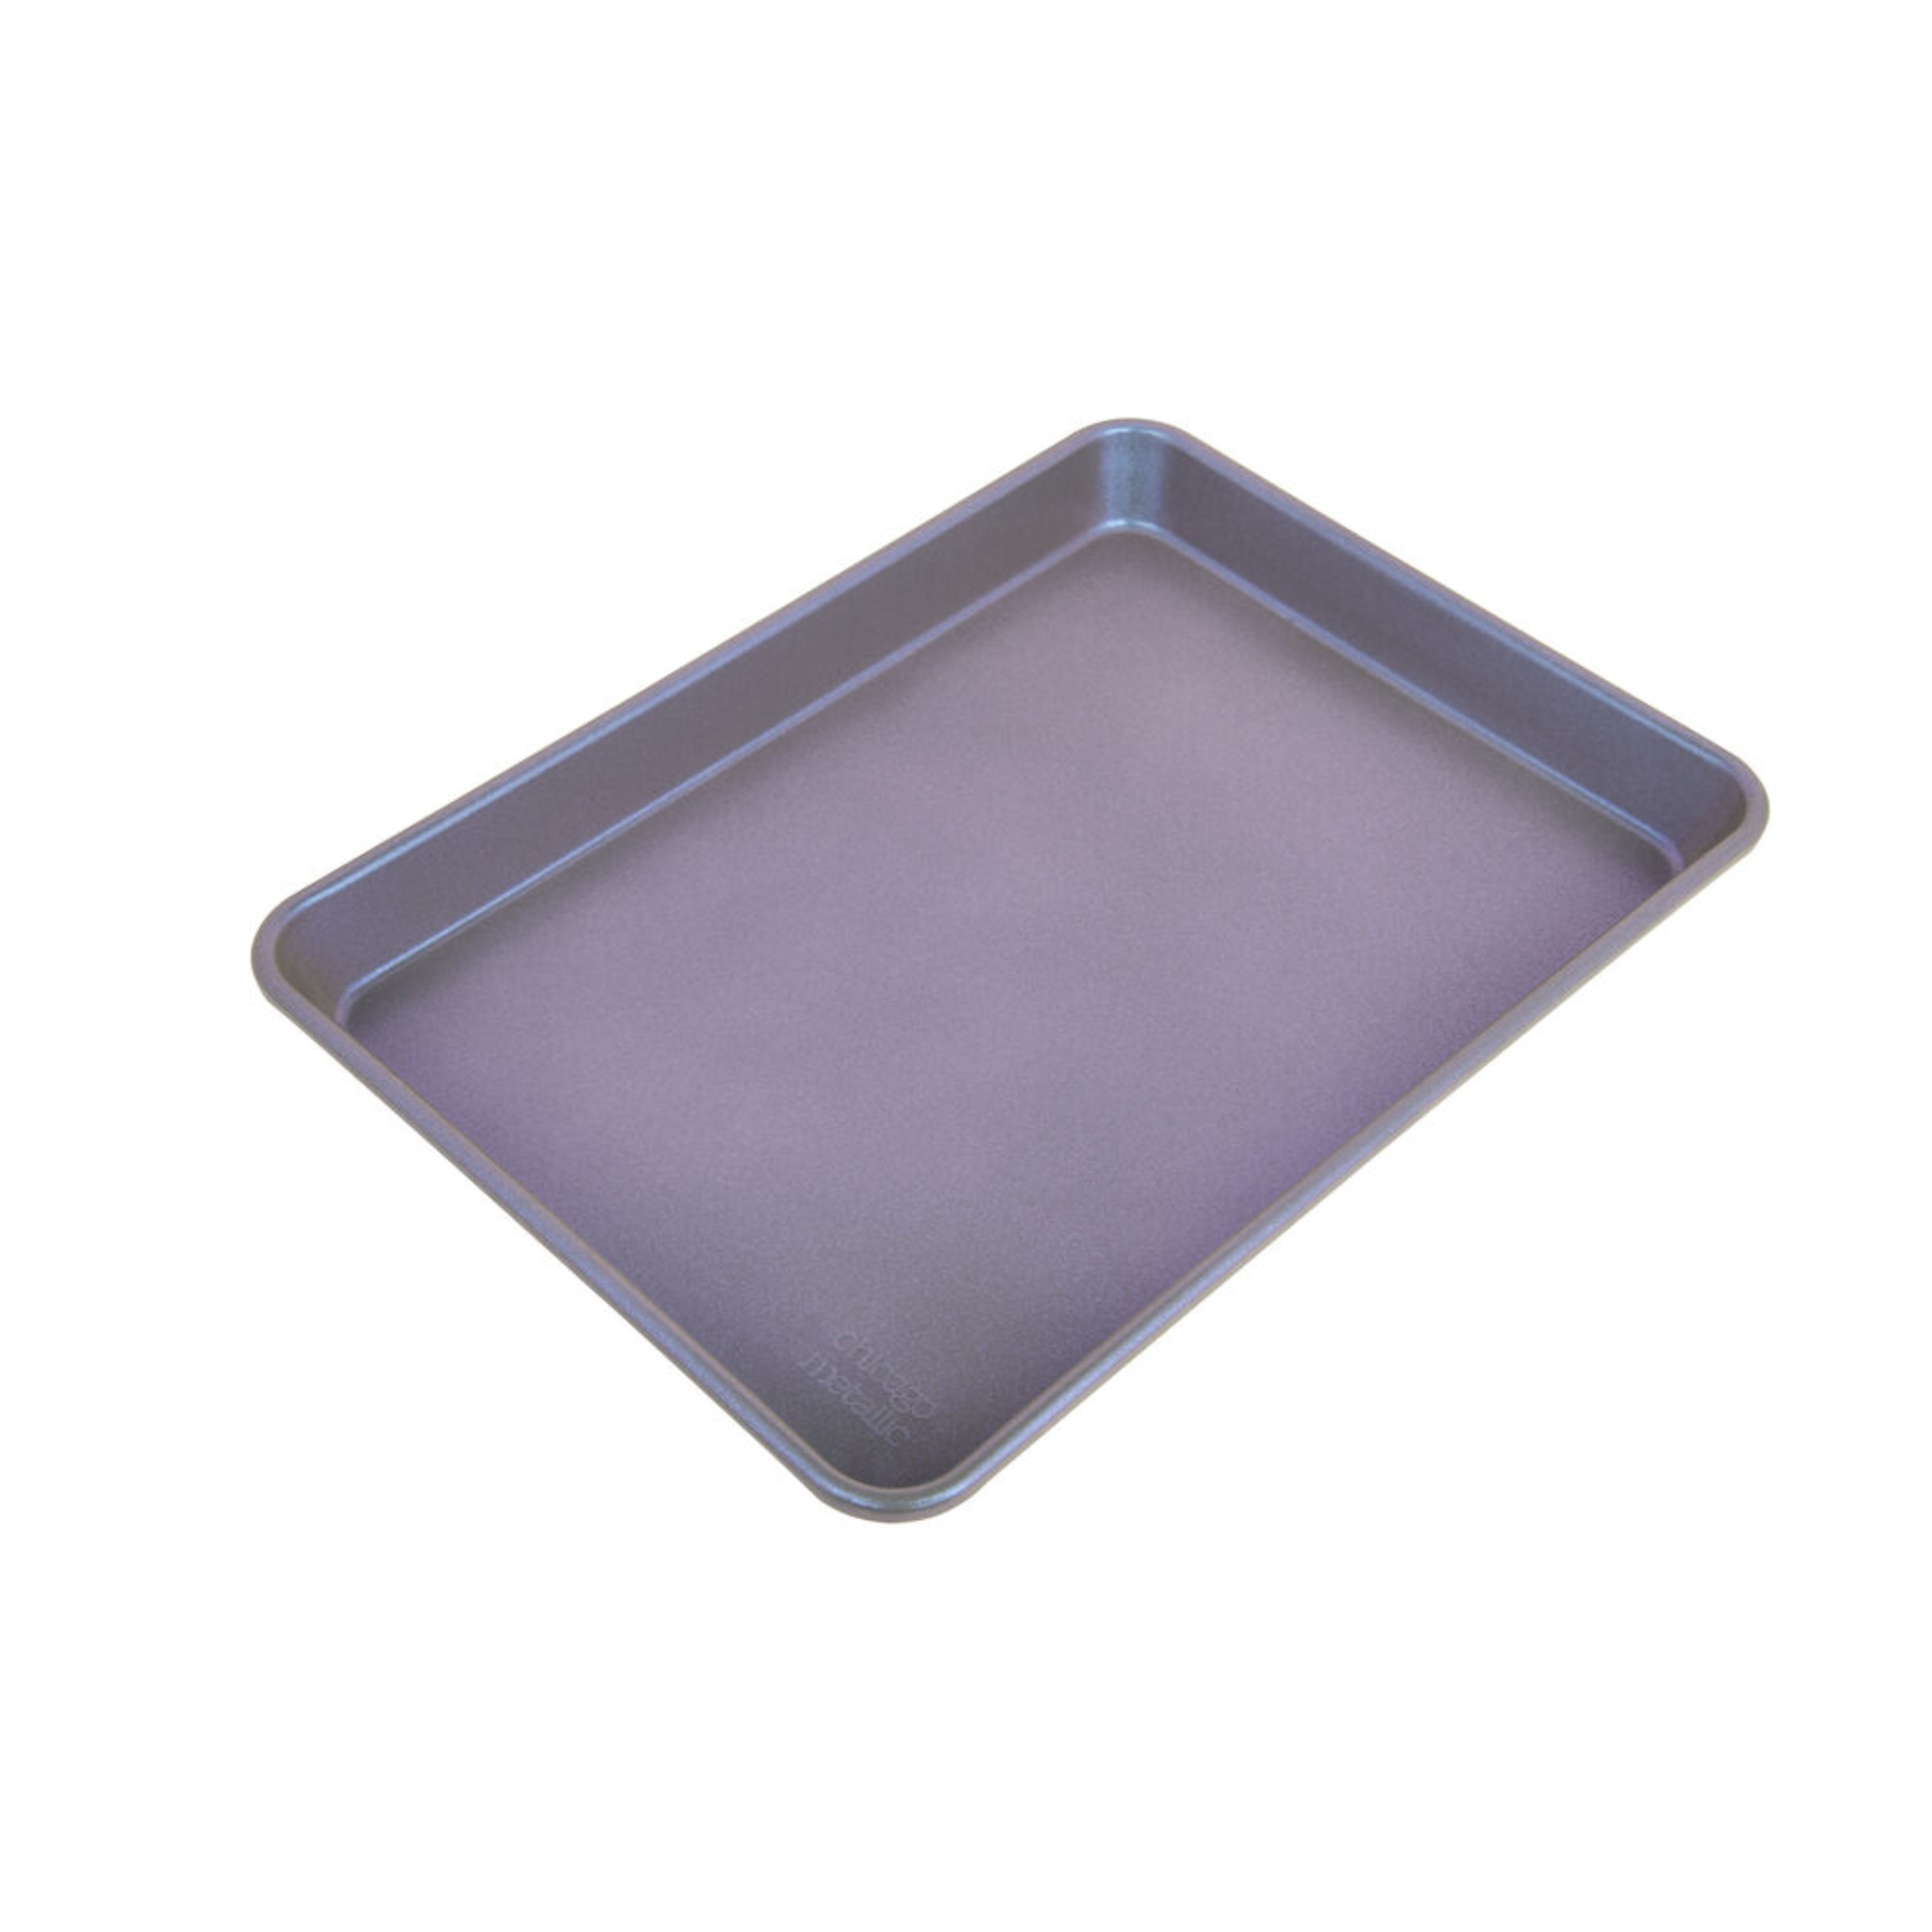 Chicago Metallic Commercial II 15x10 Jelly Roll Pan - Kitchen